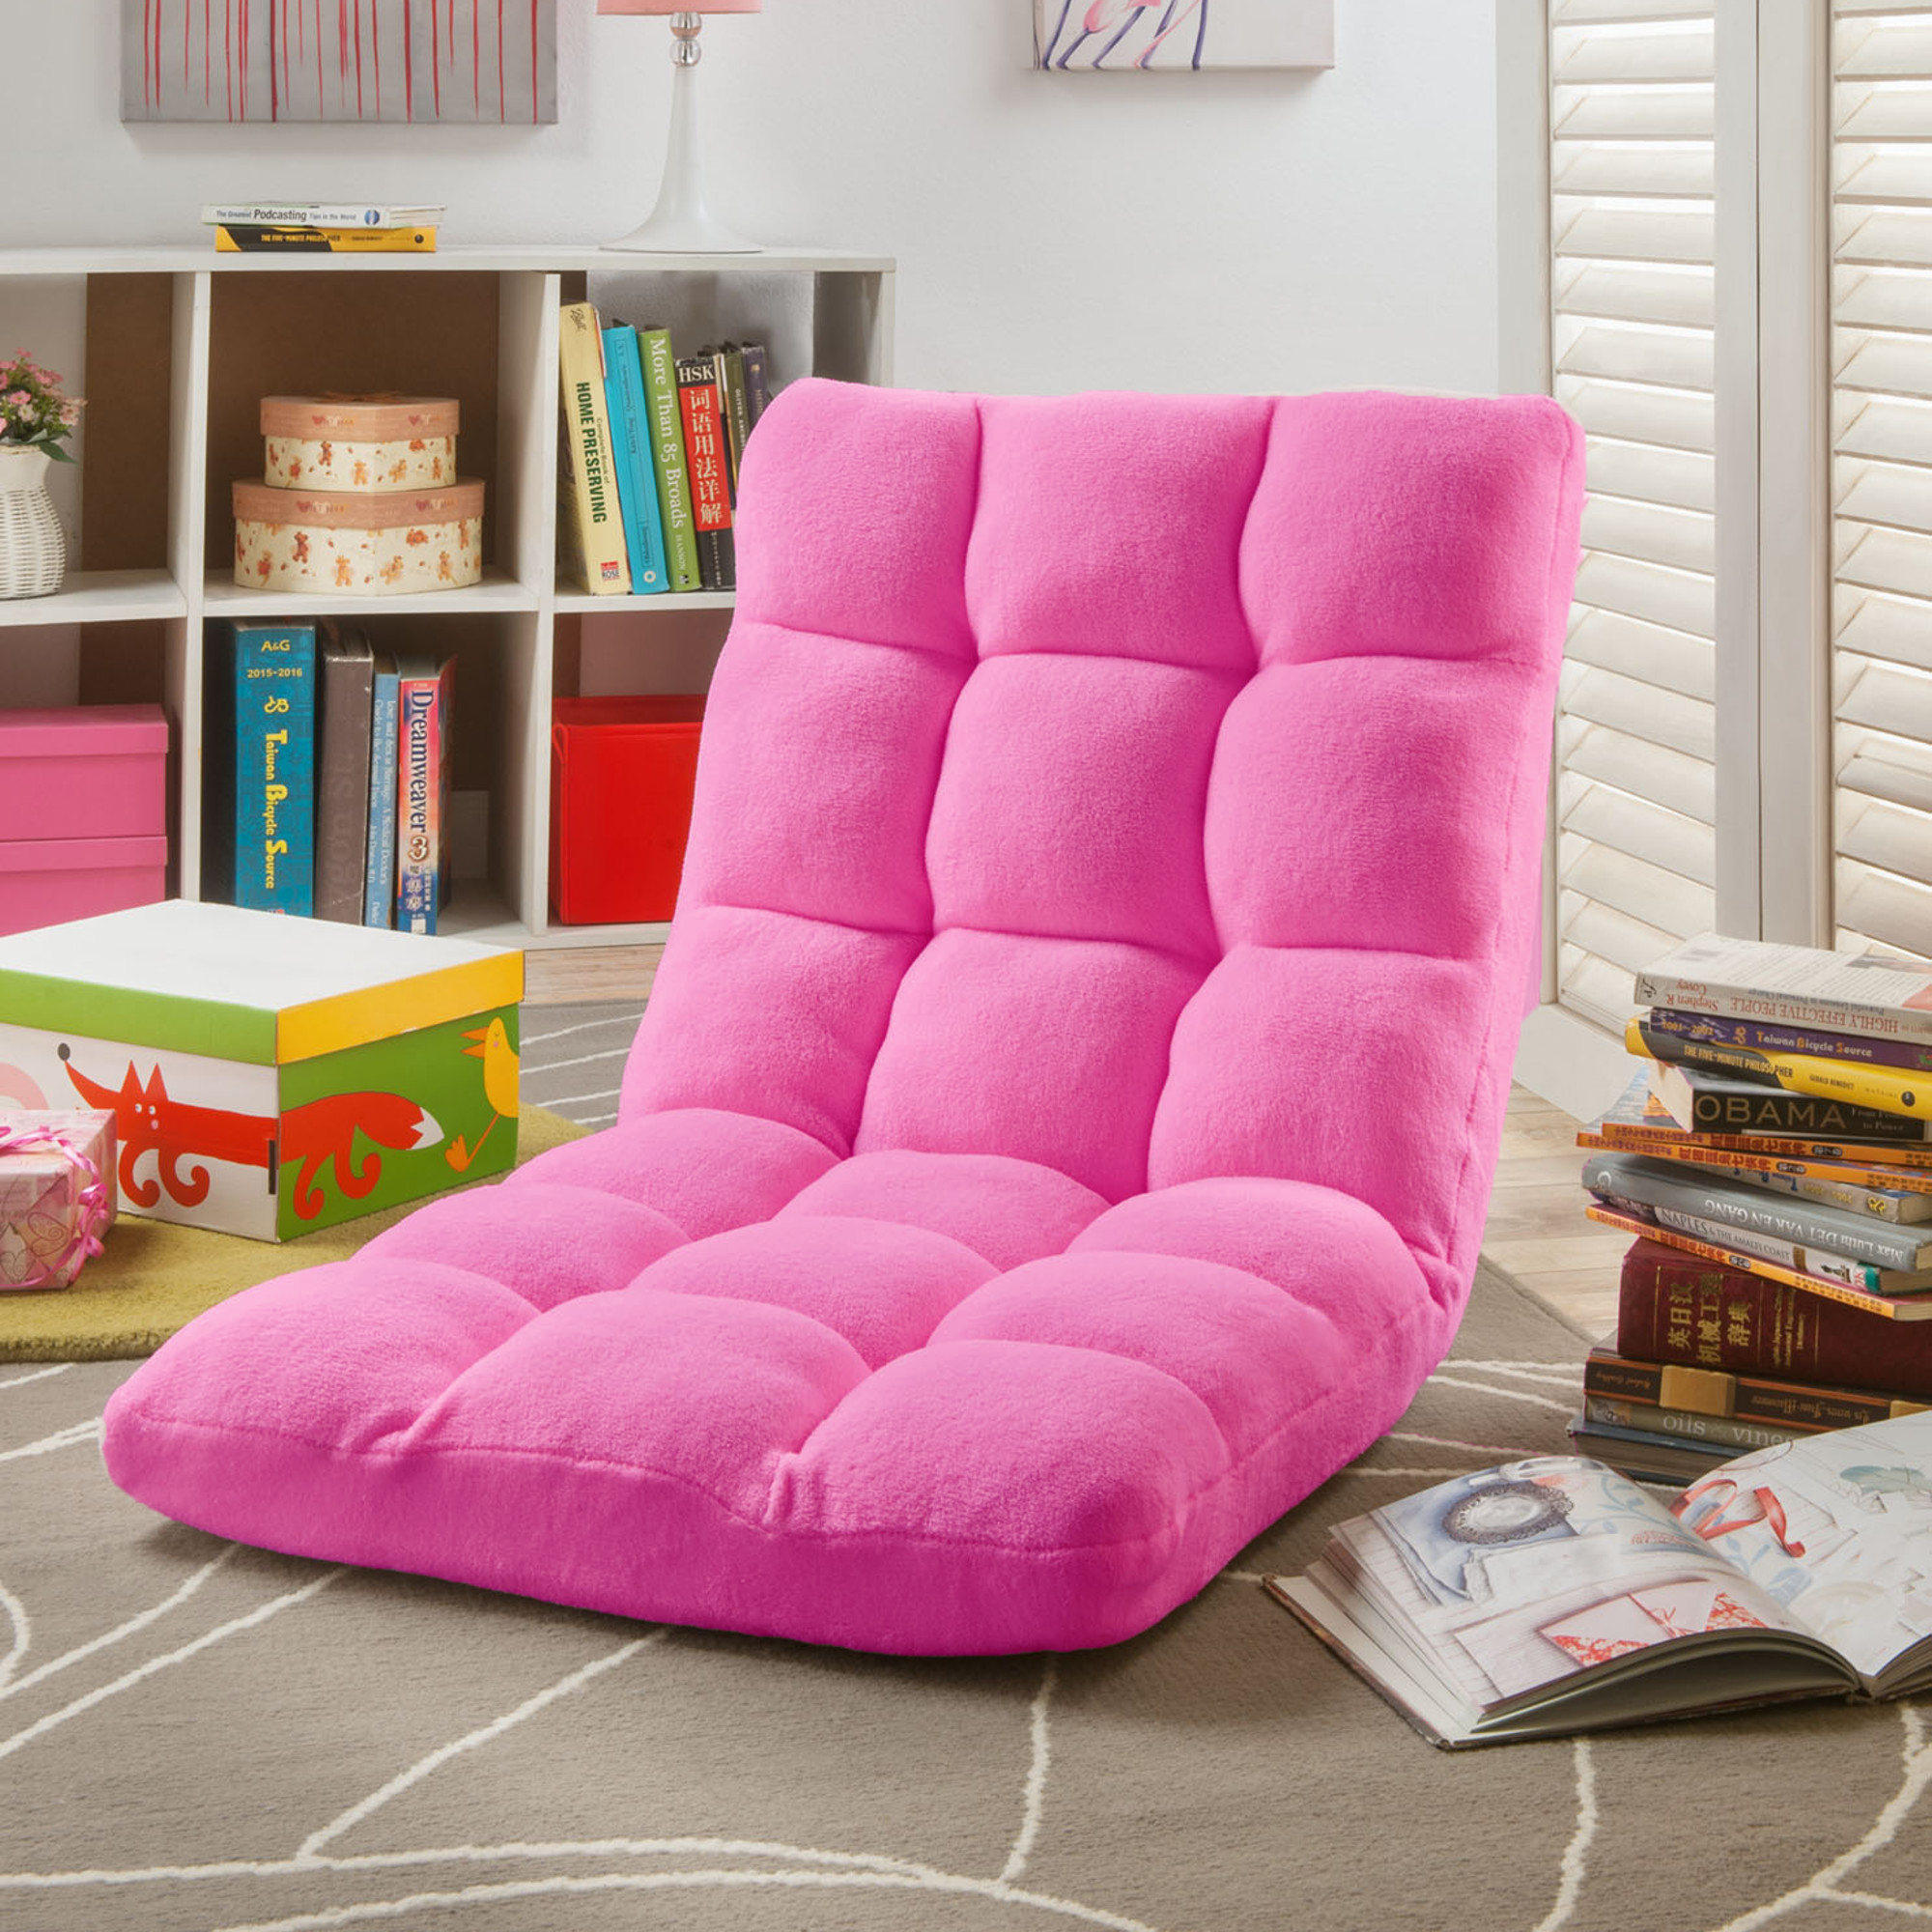 Microplush Modern Armless Quilted Recliner Chair With Foam Filling And Steel Tube Frame - Pink